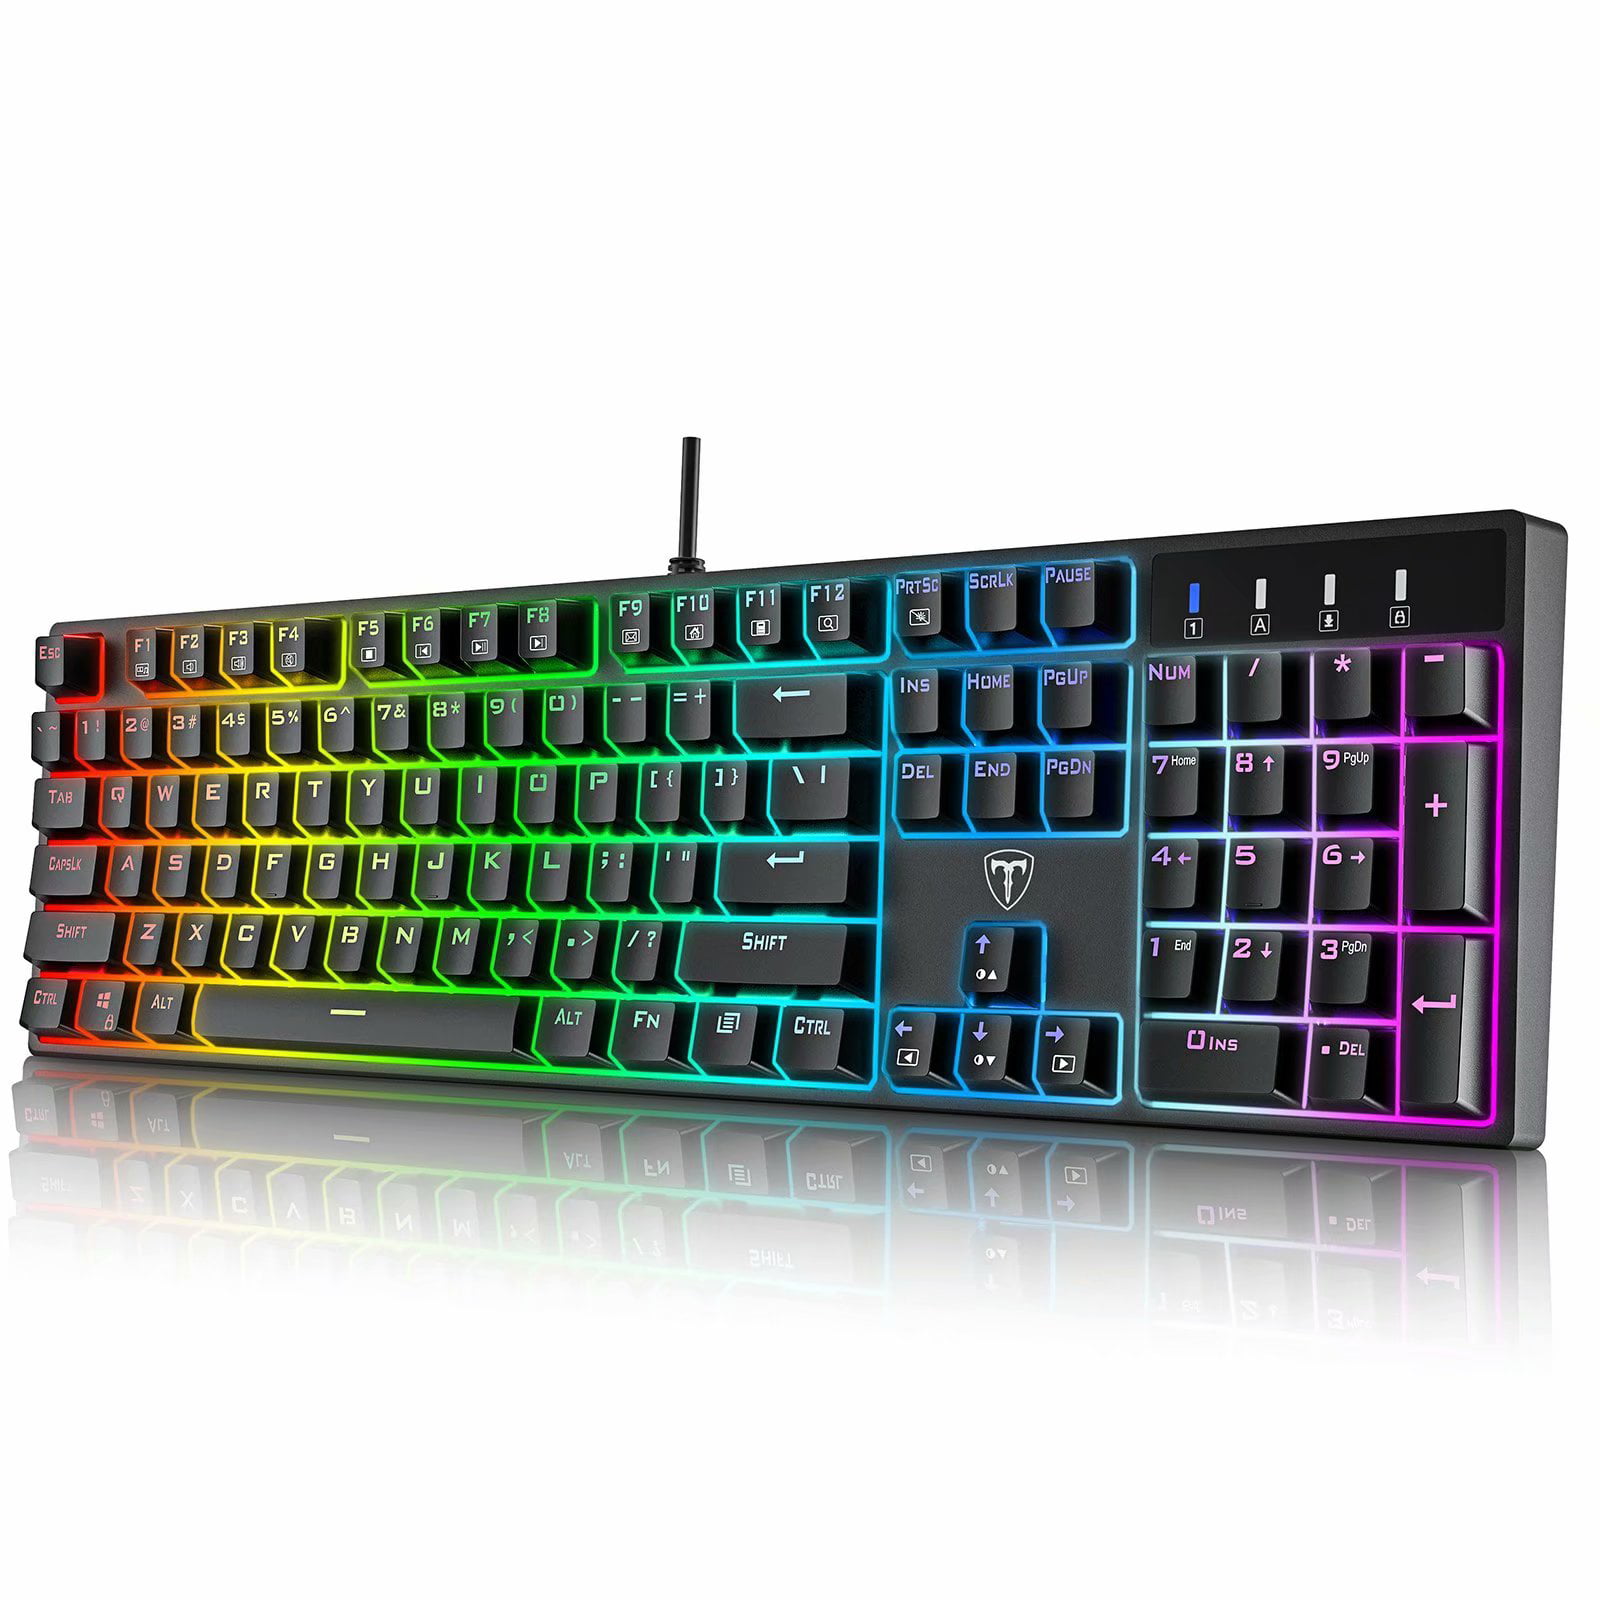 Simple Best Gaming Keyboards For Mac with Epic Design ideas